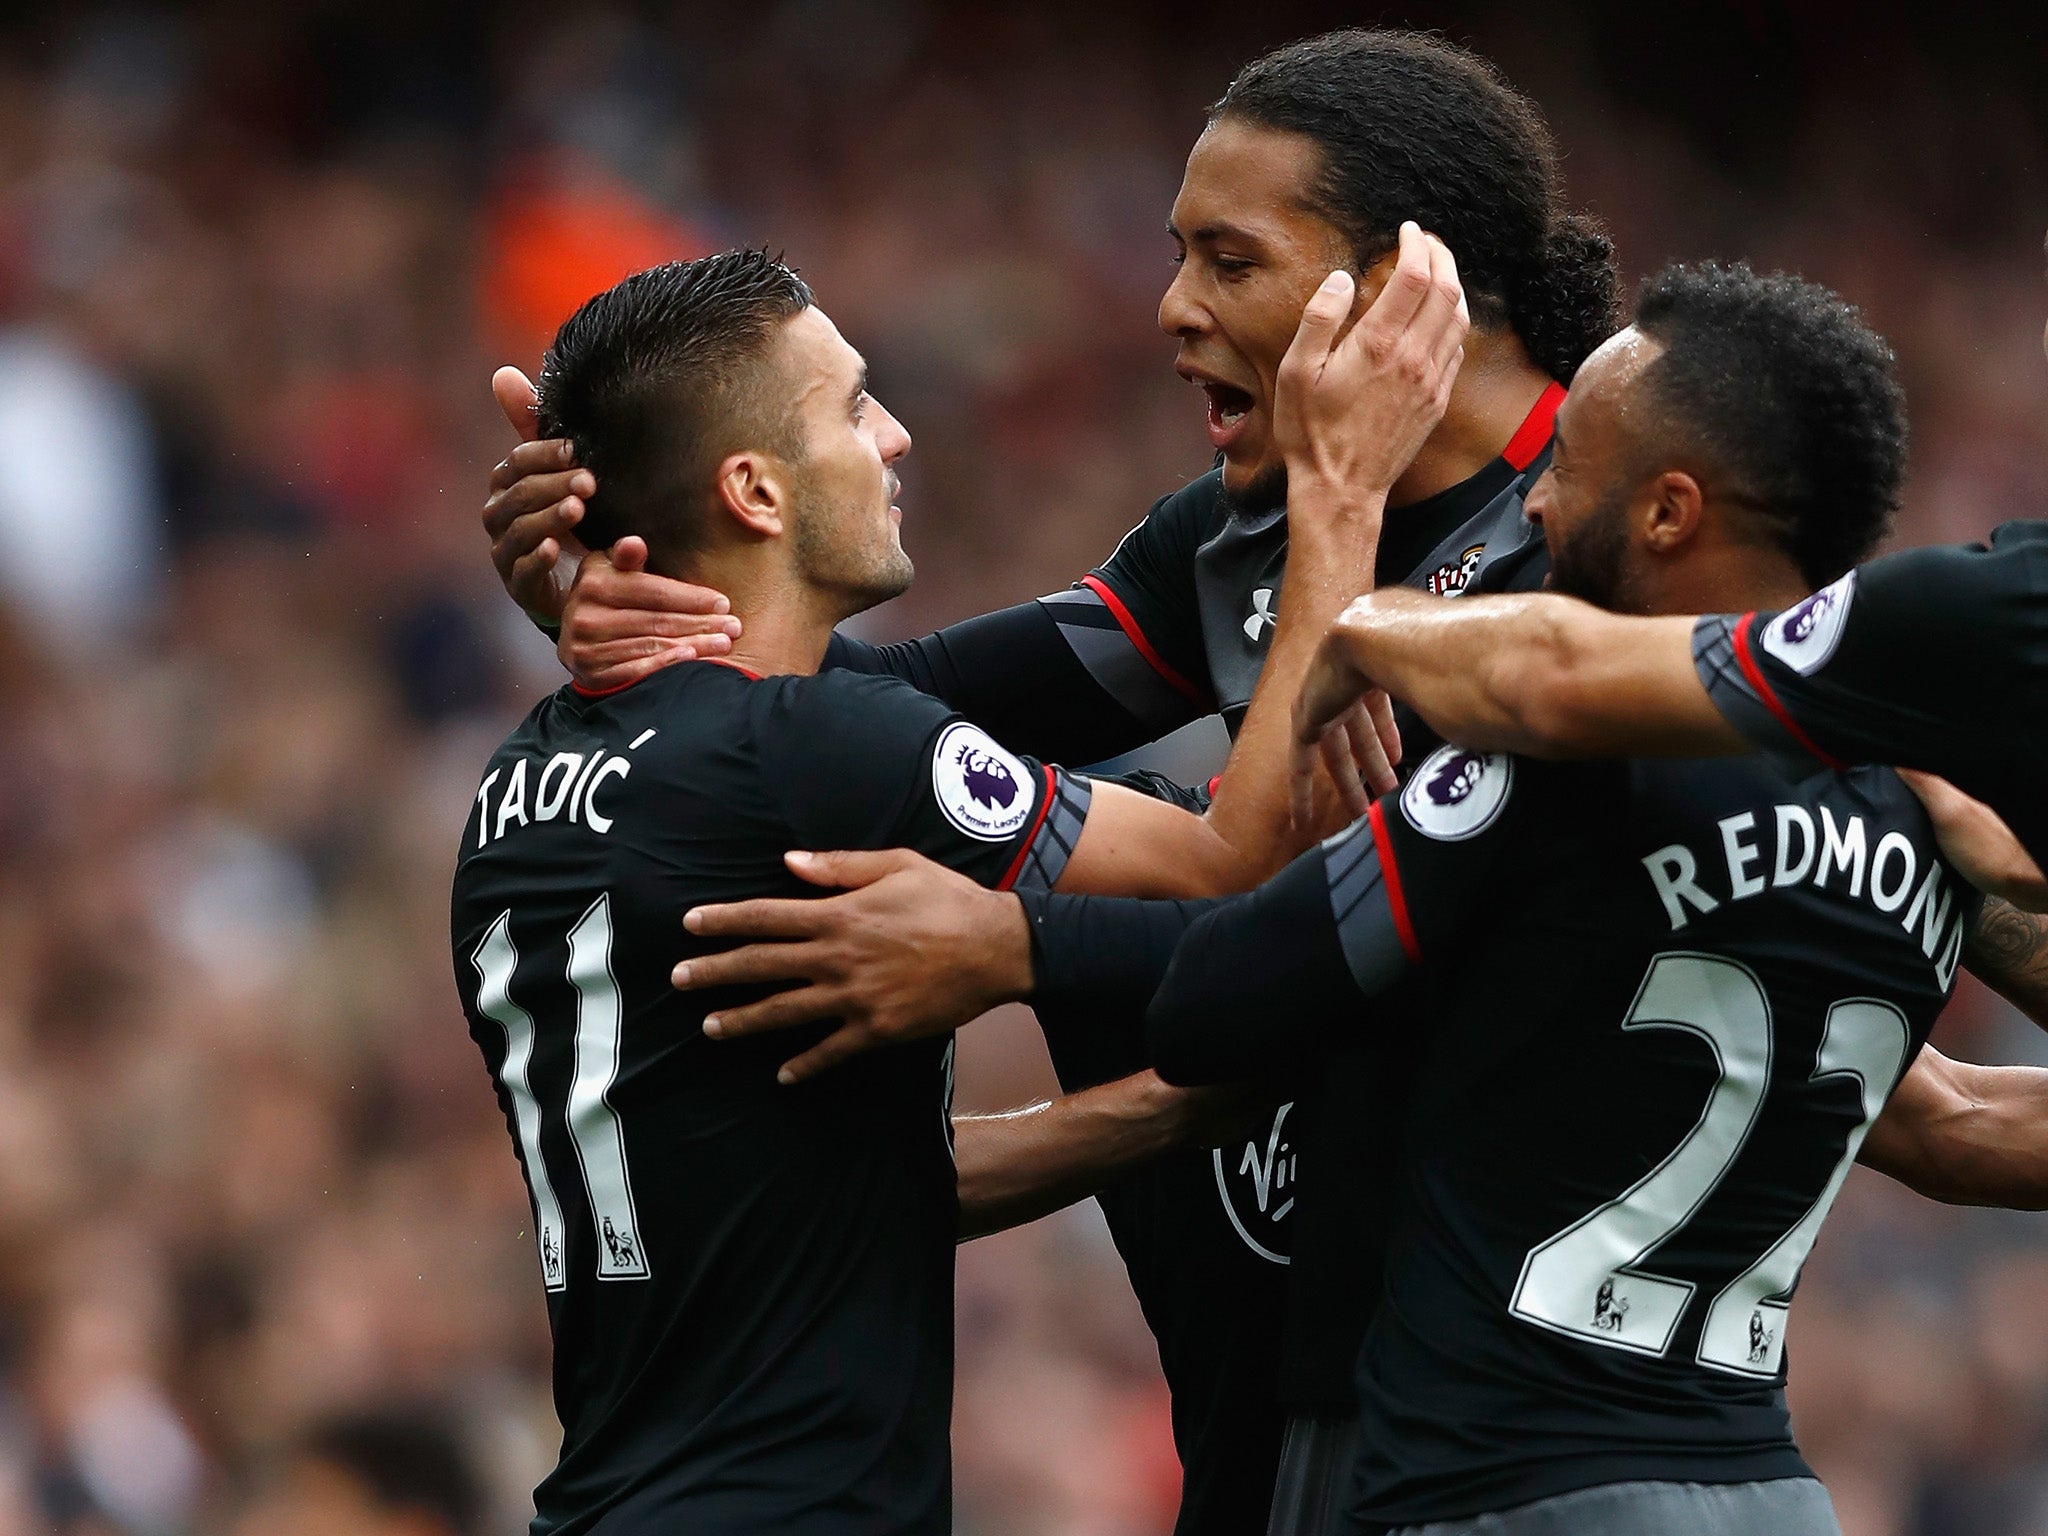 Southampton celebrate scoring the opening goal against Arsenal at the weekend